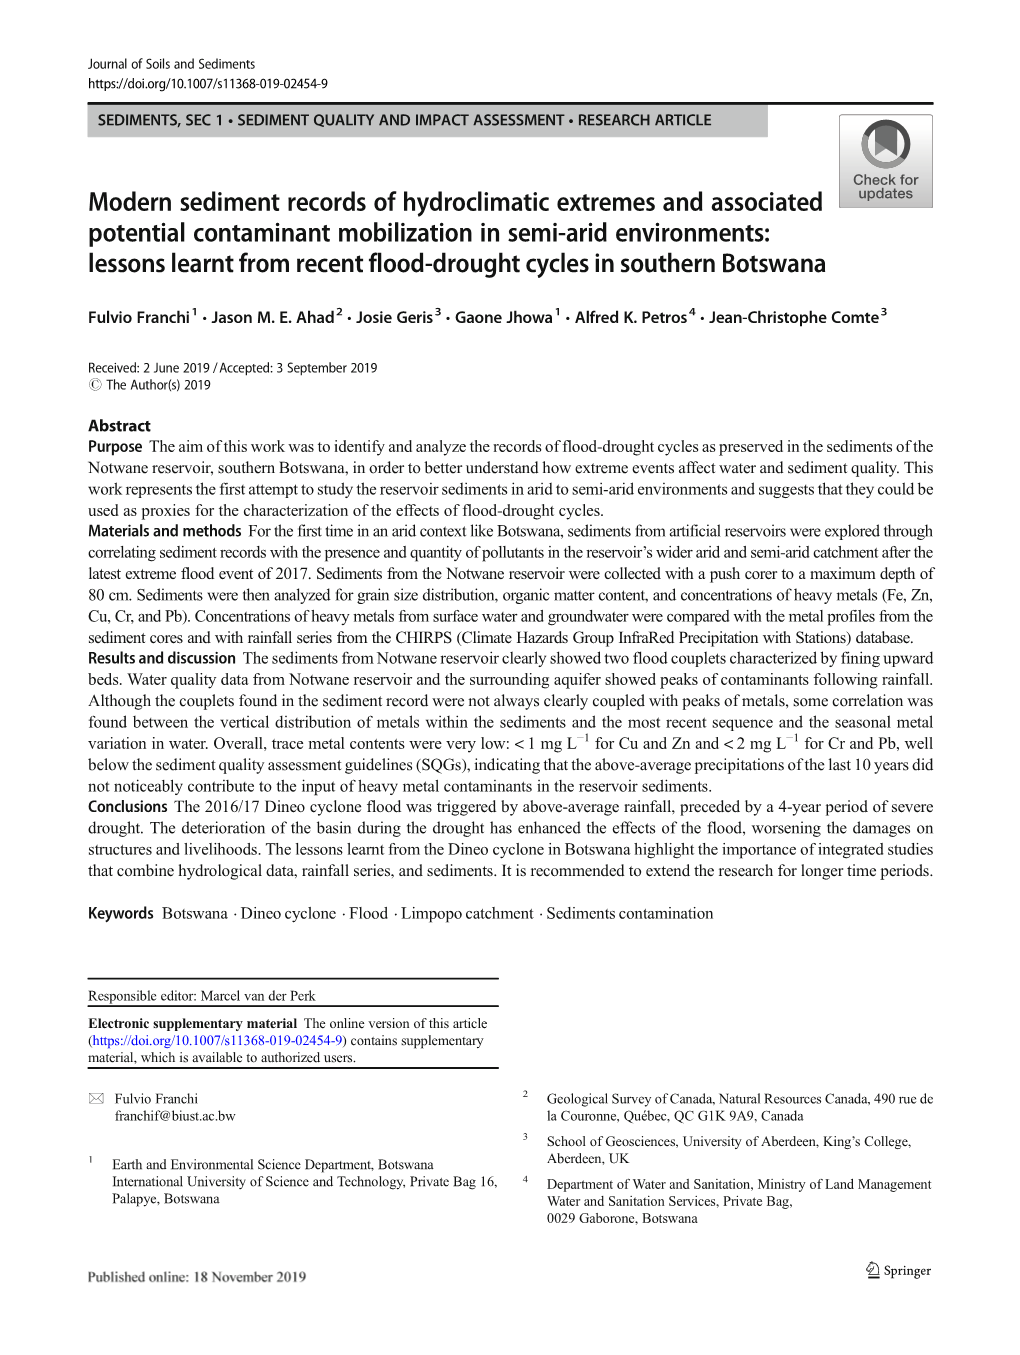 Modern Sediment Records of Hydroclimatic Extremes and Associated Potential Contaminant Mobilization in Semi-Arid Environments: L